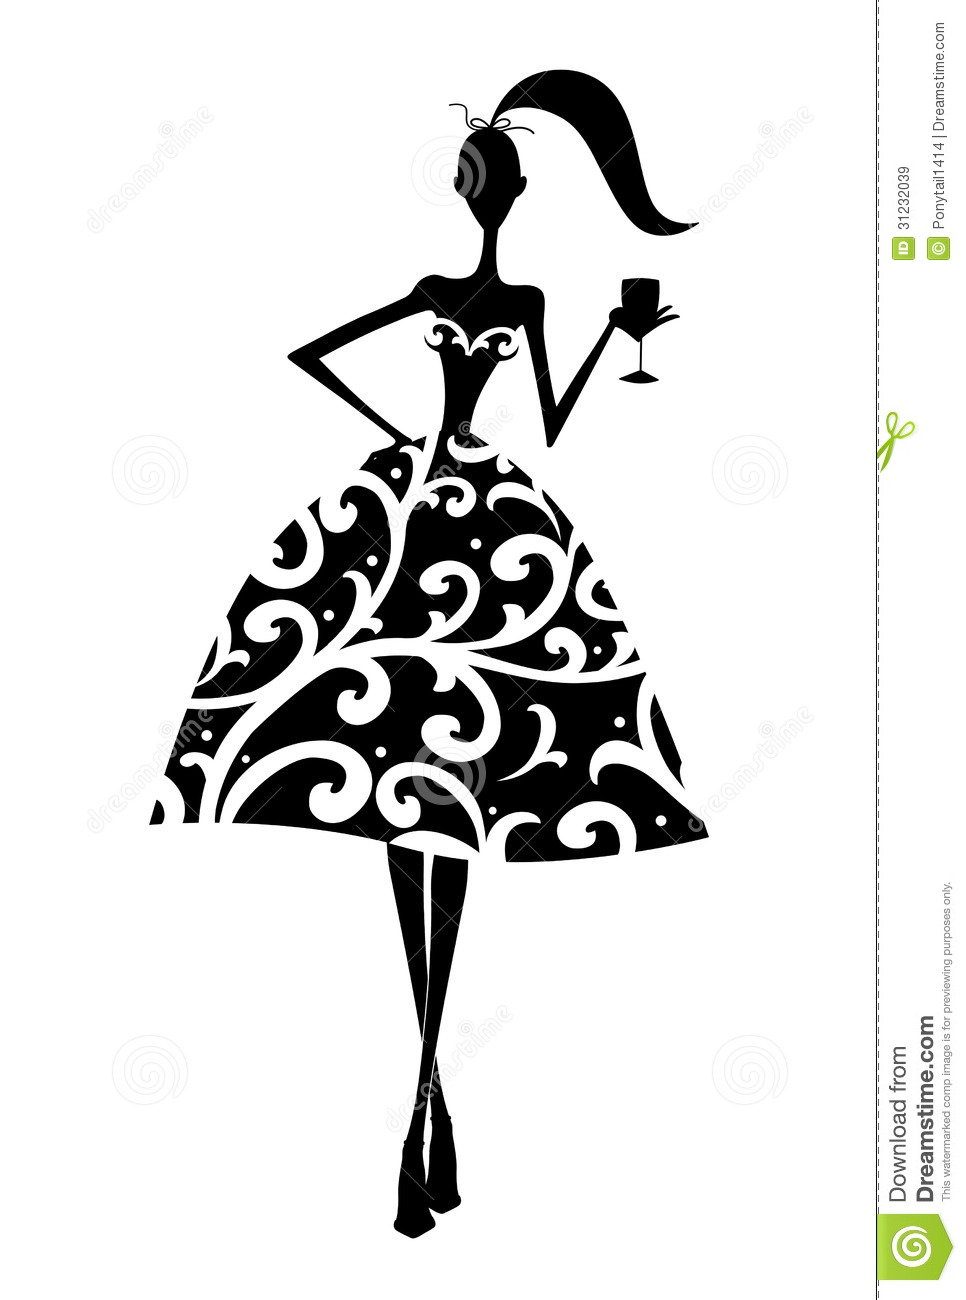 Woman In Dress Silhouette Clip Art Silhouette Of A Girl At A